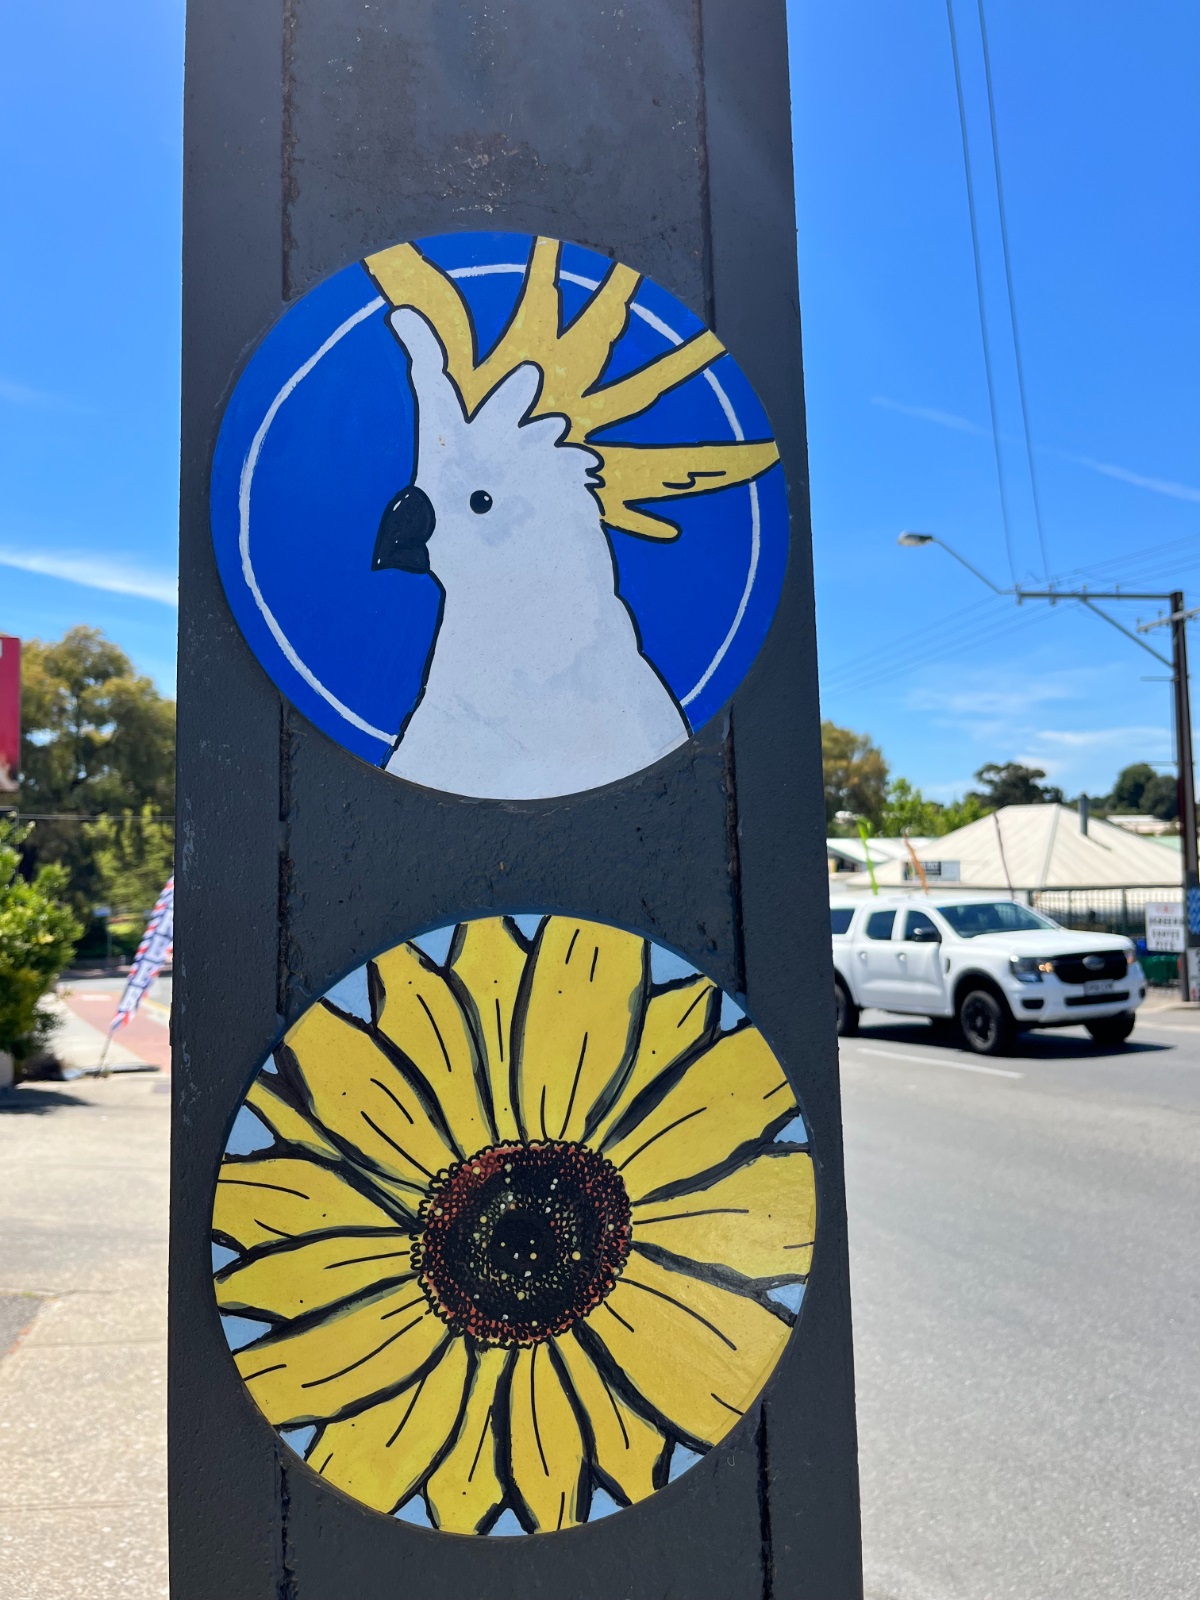 A close-up image of Stobie pole artworks in Old Reynella.